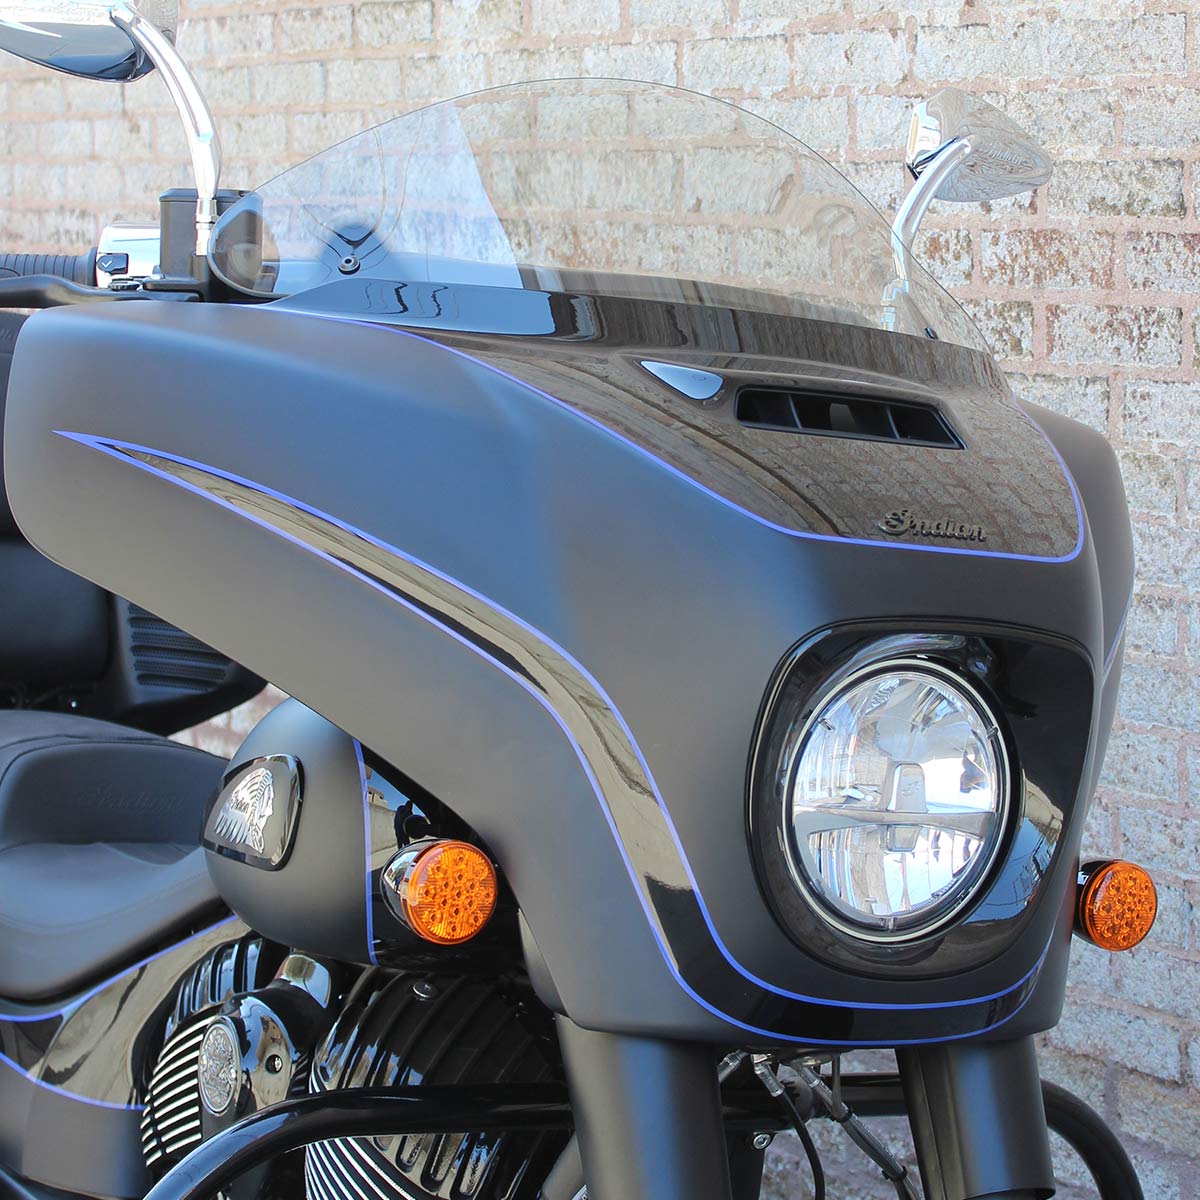 12" Tint Flare™ Windshield for Indian® 2014-2023 Chieftain and Roadmaster motorcycle models